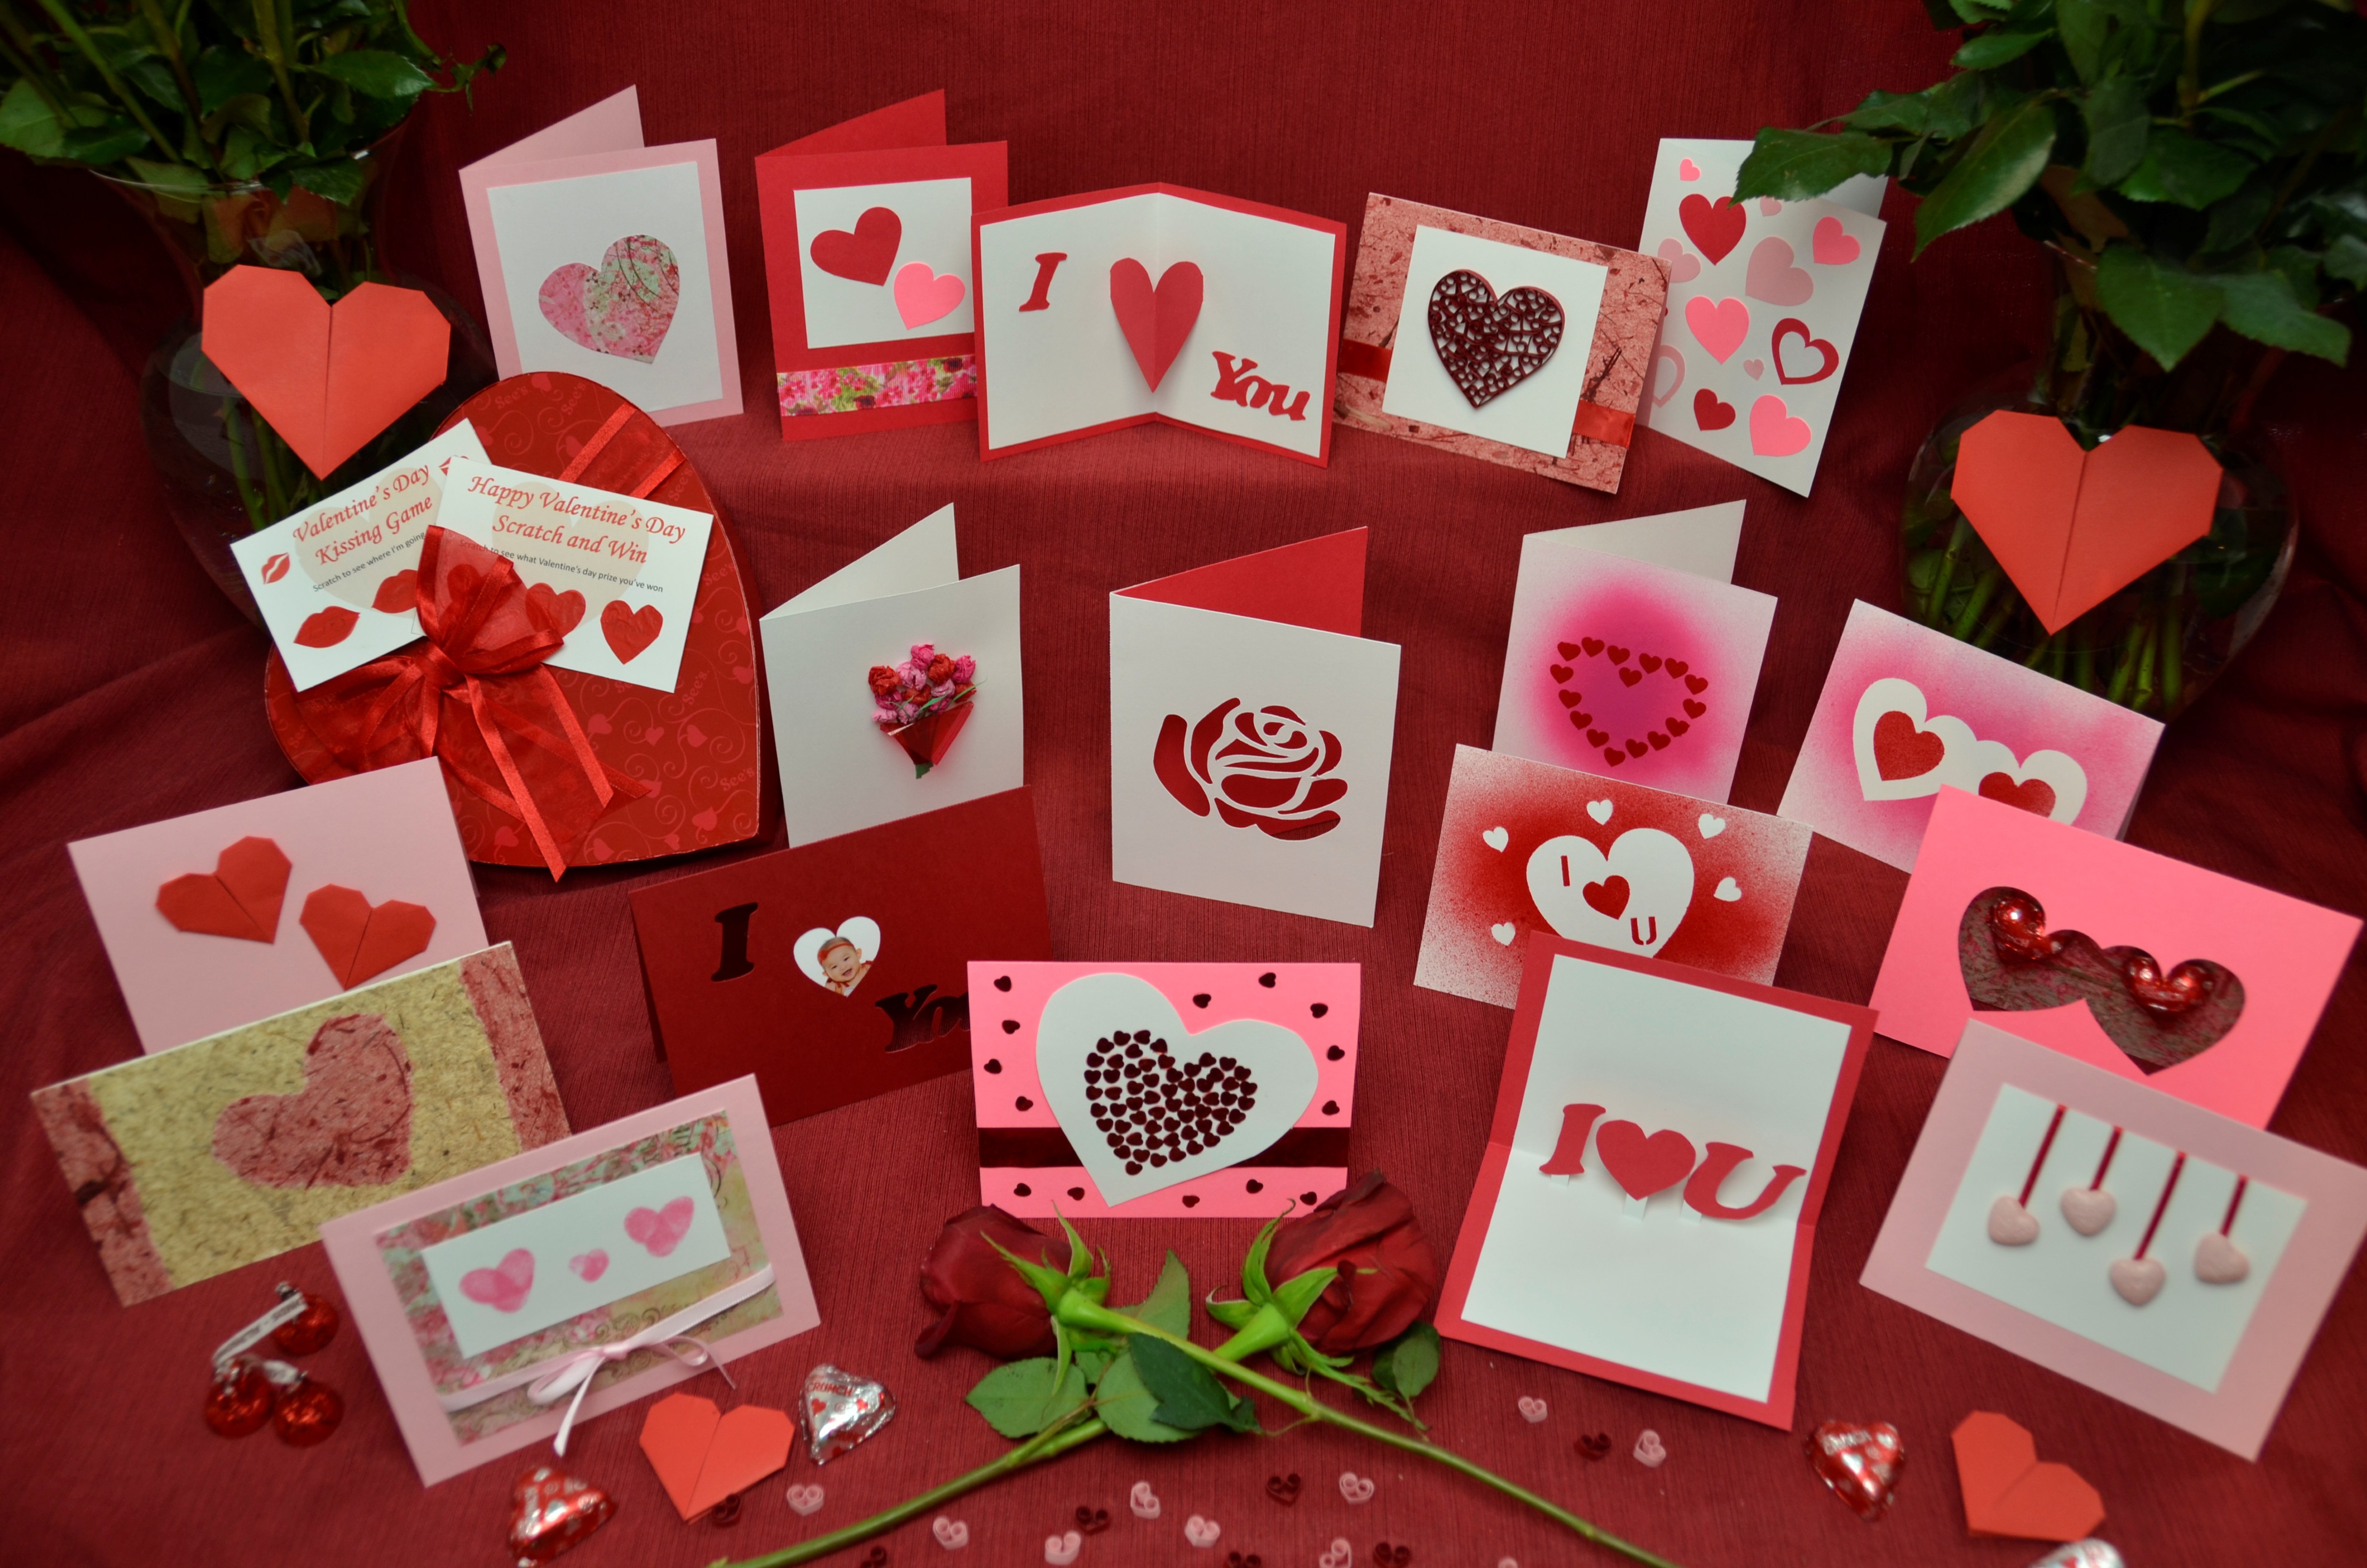 Creative Valentines Gifts All Products Are Ed Cheaper Than Retail Free Delivery Returns Off 78